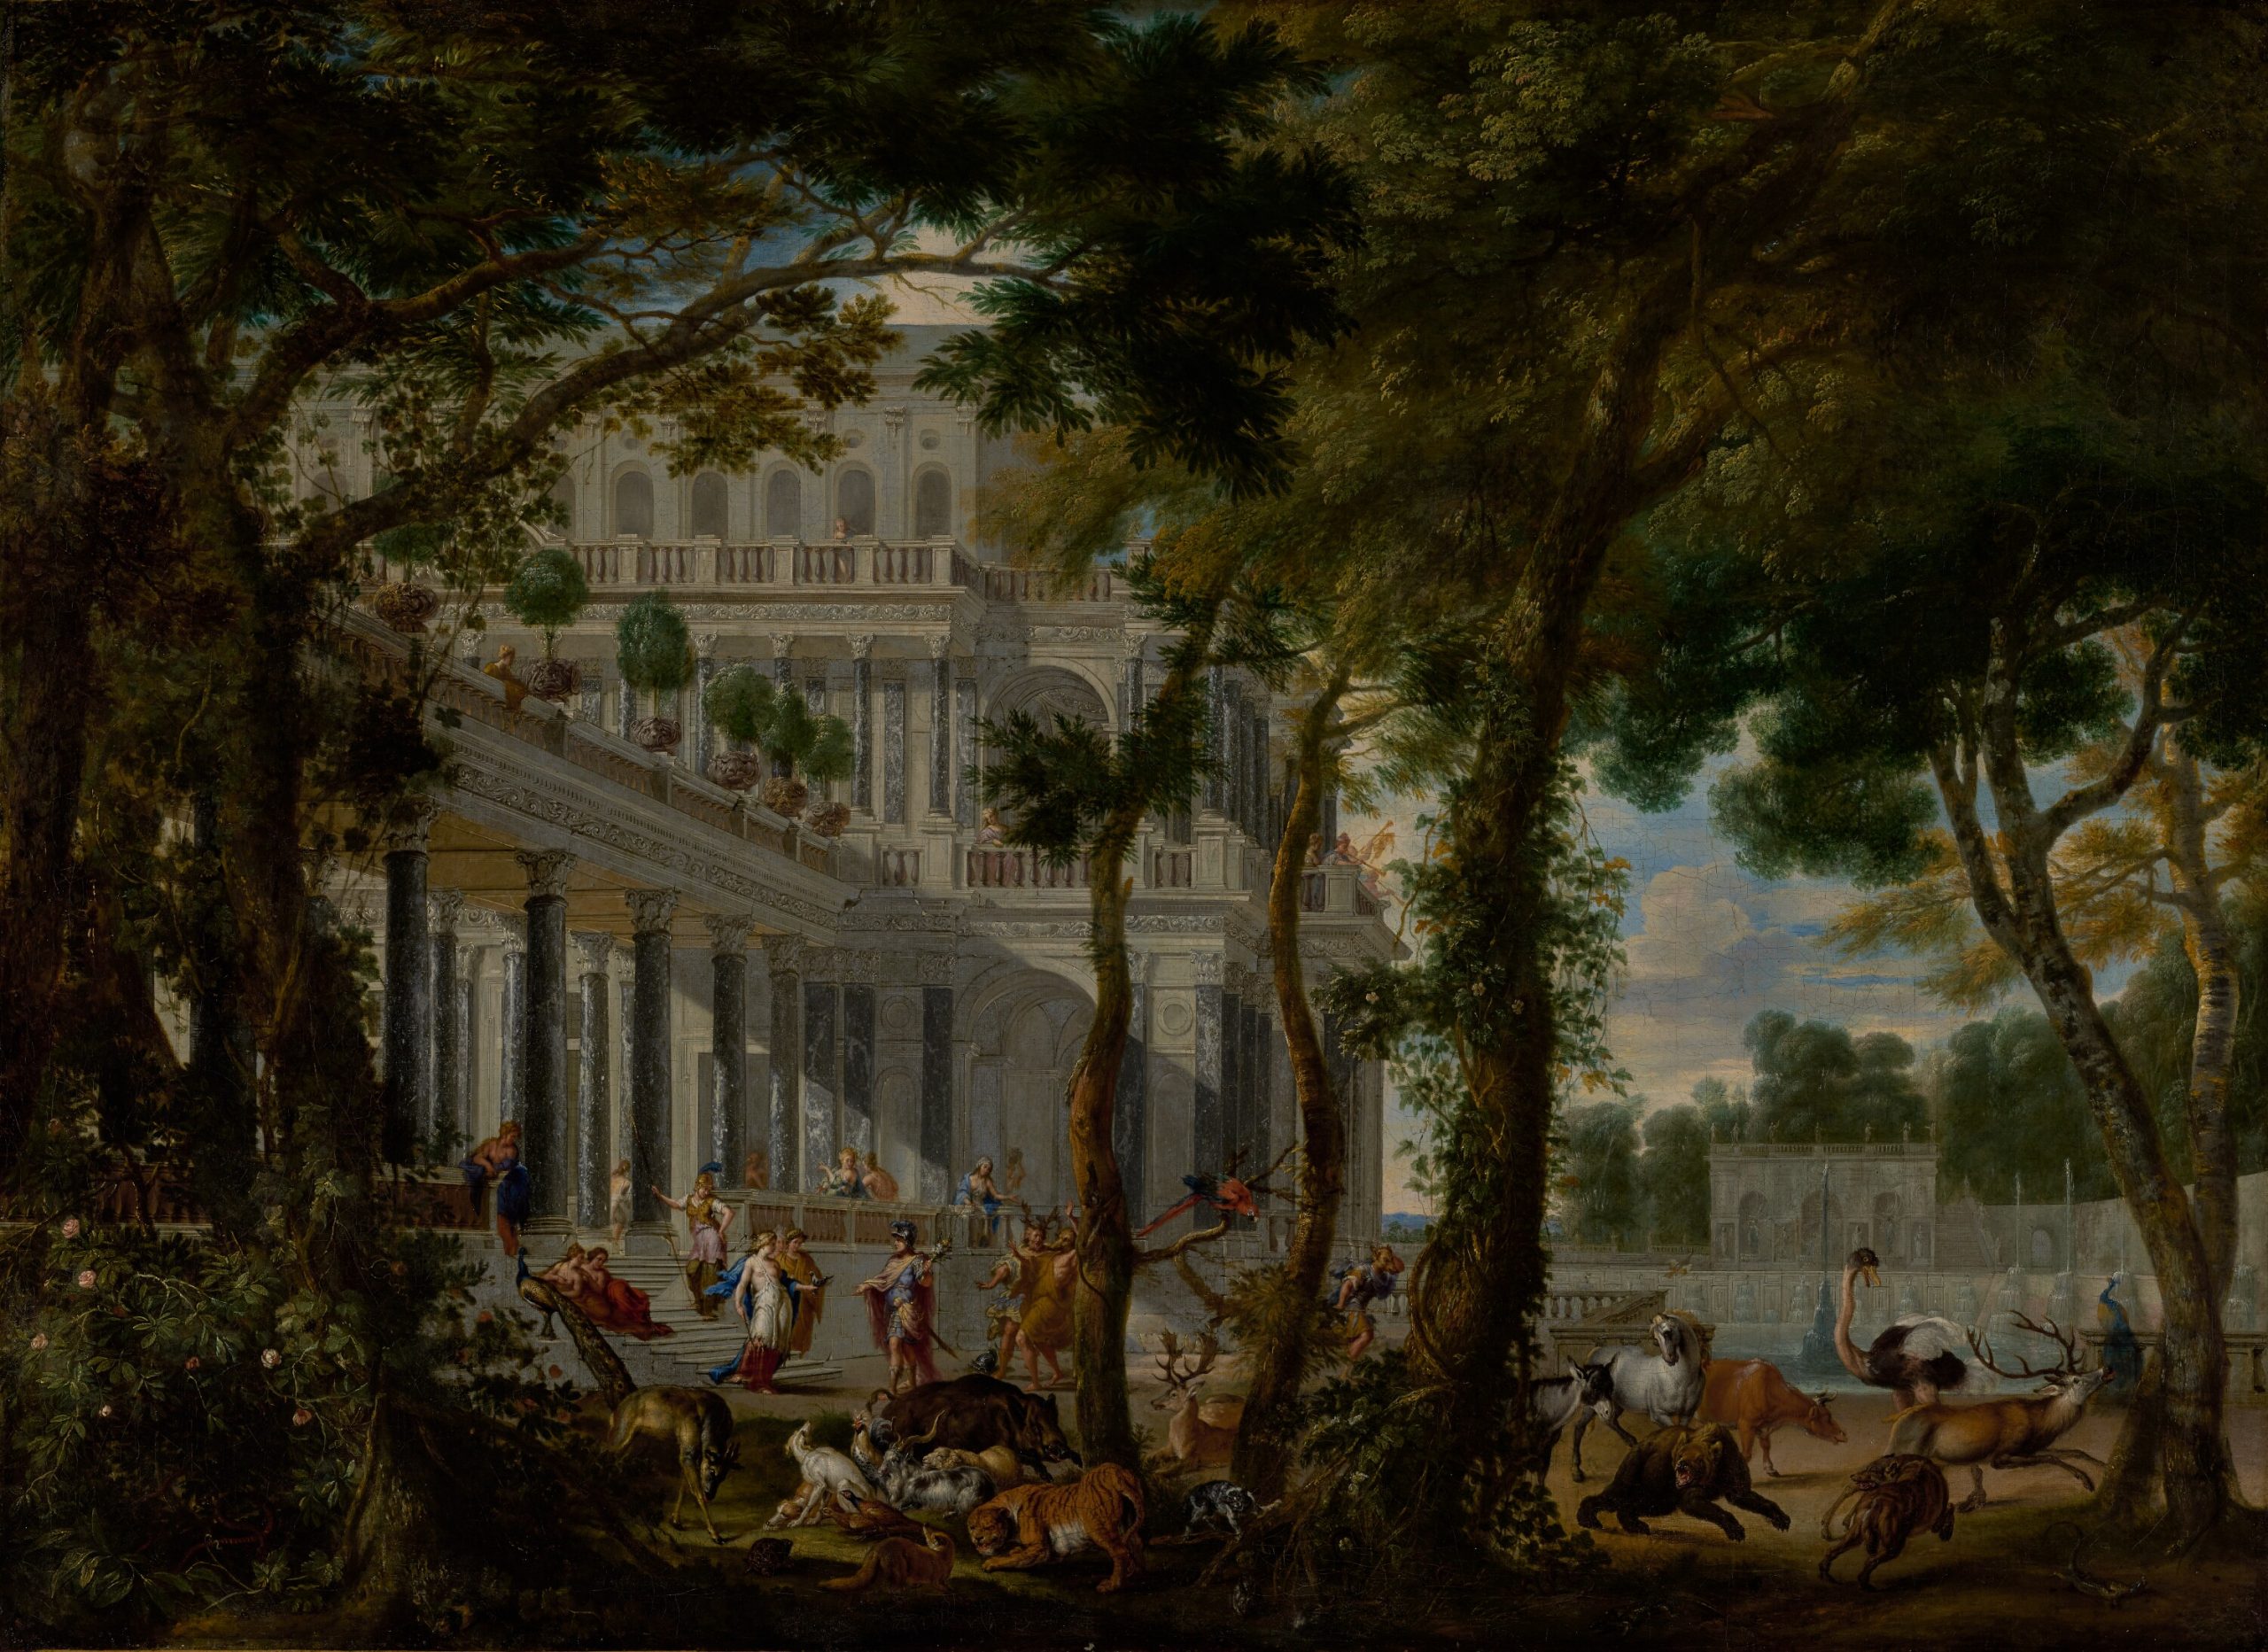 A painting of a scene where there are people and animals roaming about in front of large white palace with pillars.